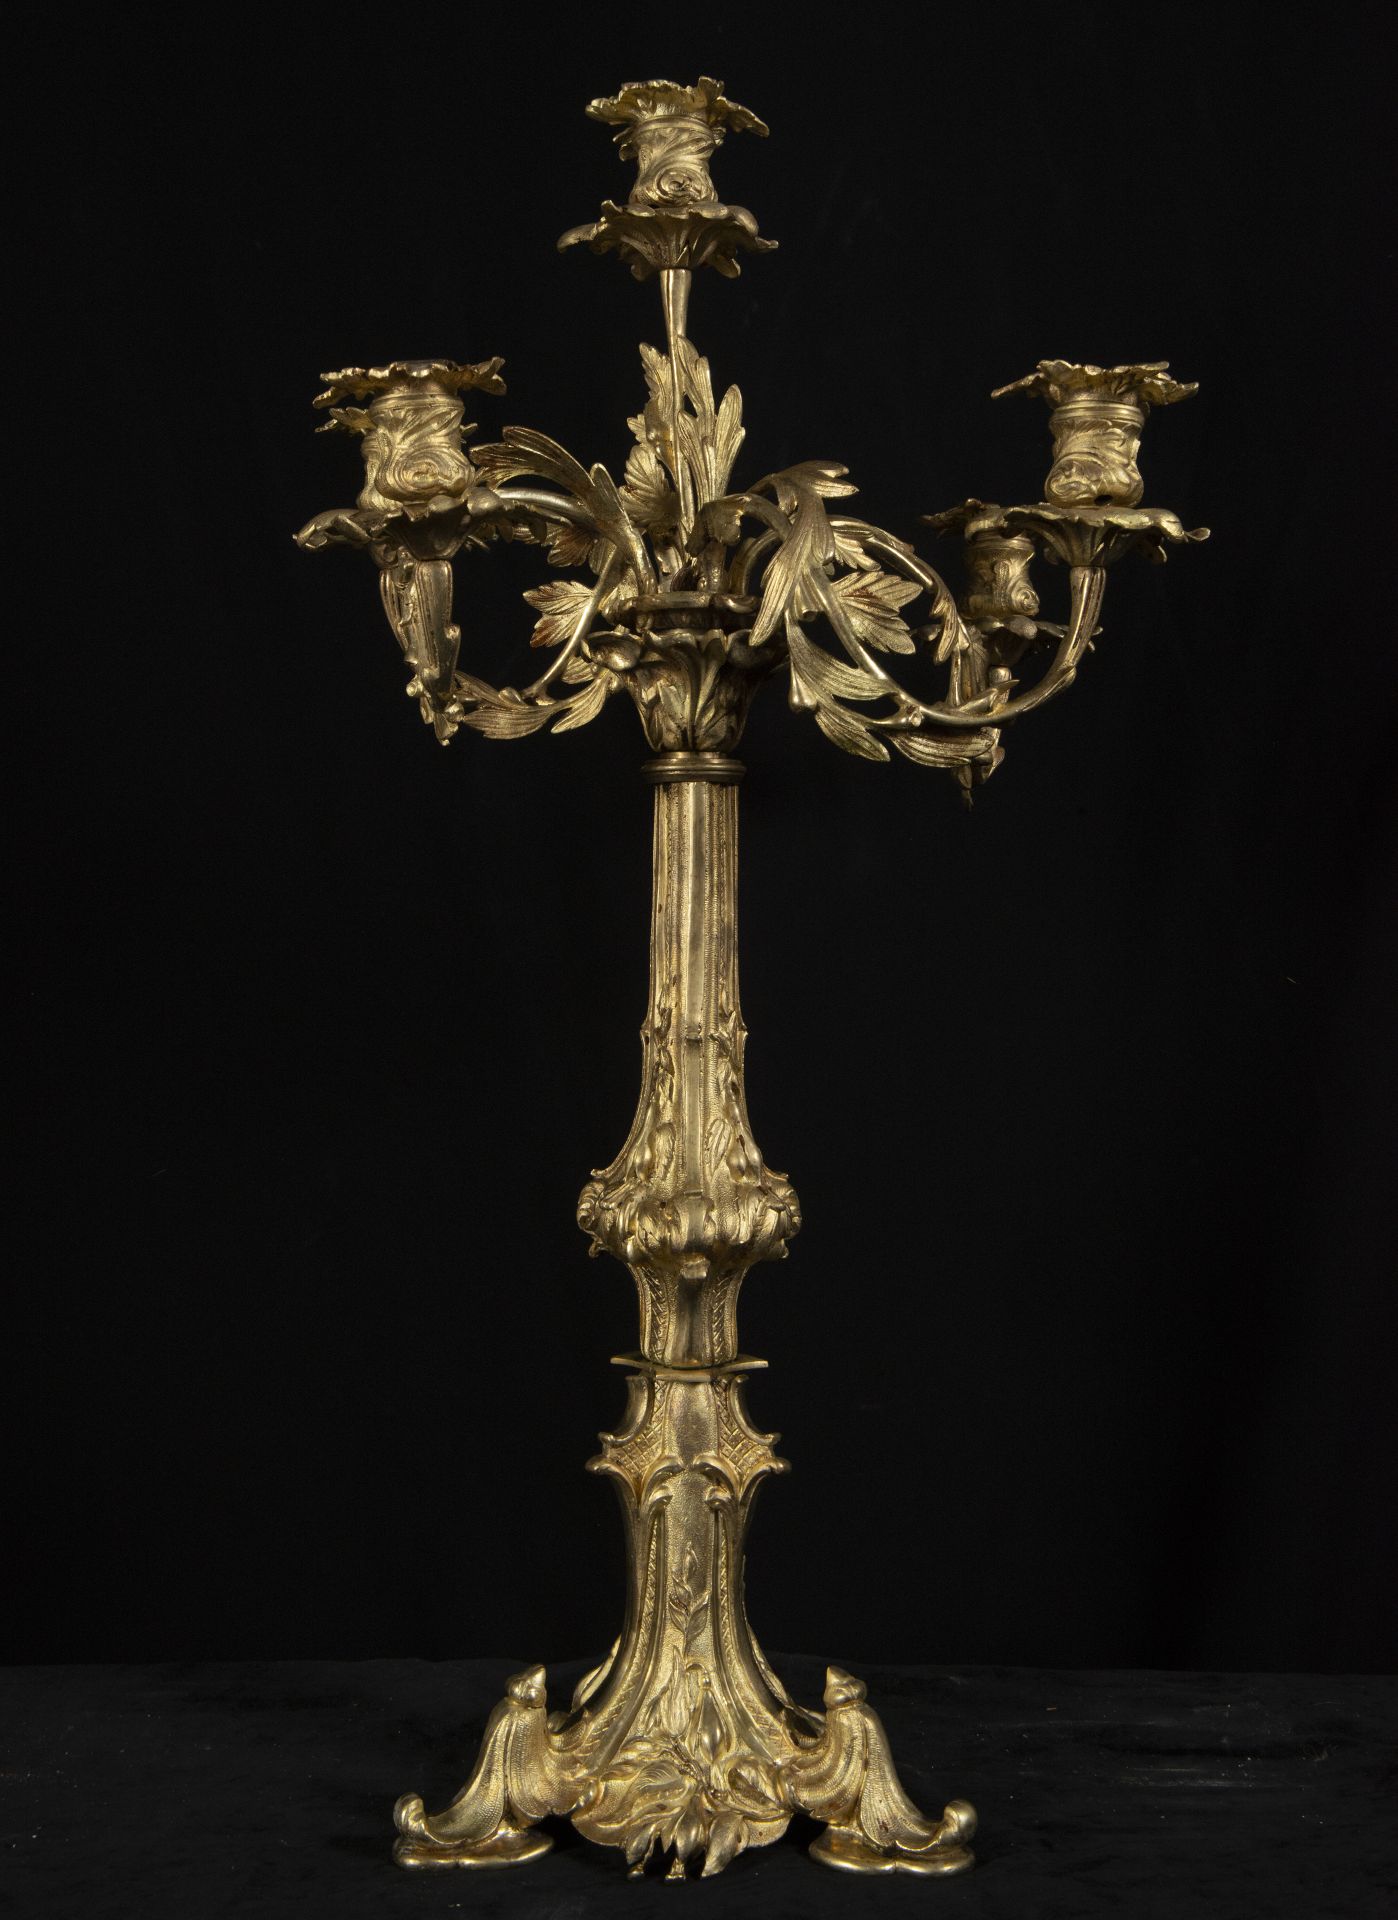 Pair of Large Candelabras in mercury-gilded bronze, 19th century - Image 2 of 2